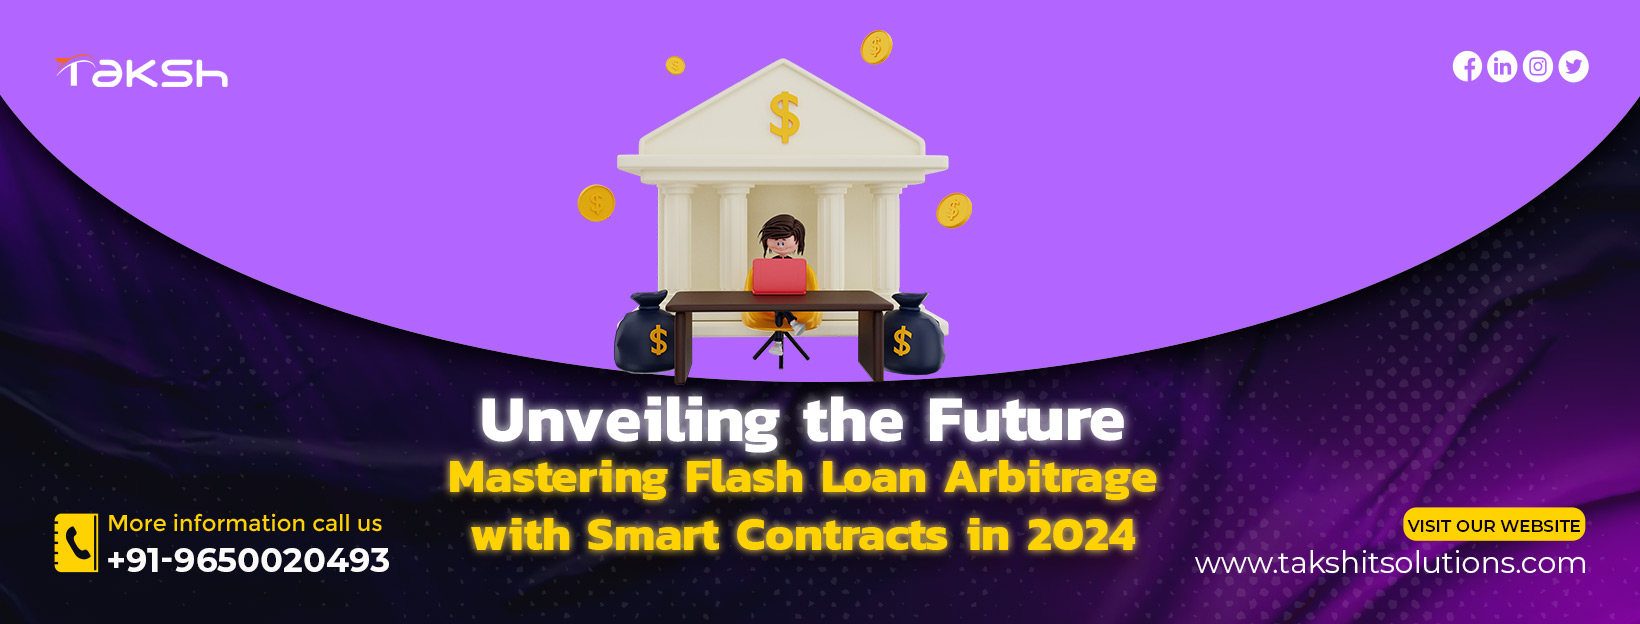 Unveiling the Future: Mastering Flash Loan Arbitrage with Smart Contracts in 2024